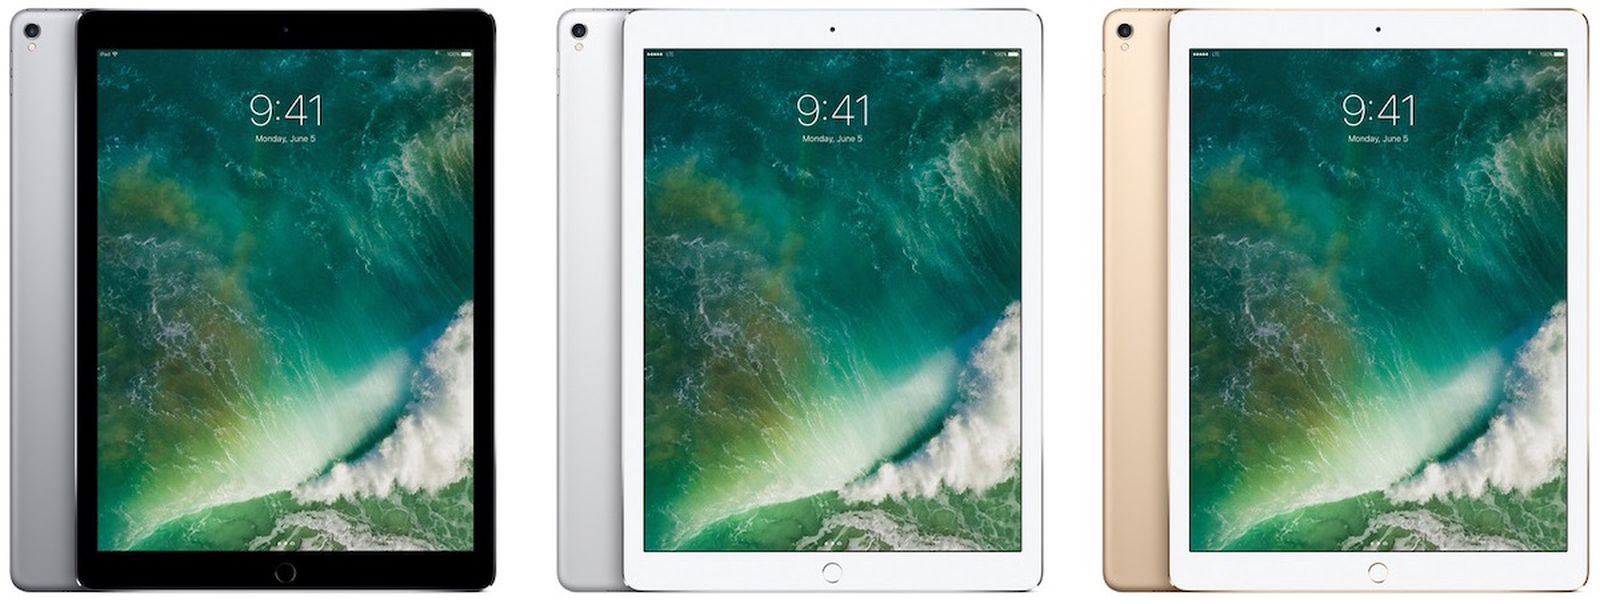 Deals Spotlight 12 9 Inch Ipad Pro 17 Discounted To New Low Price Up To 480 Off Macrumors